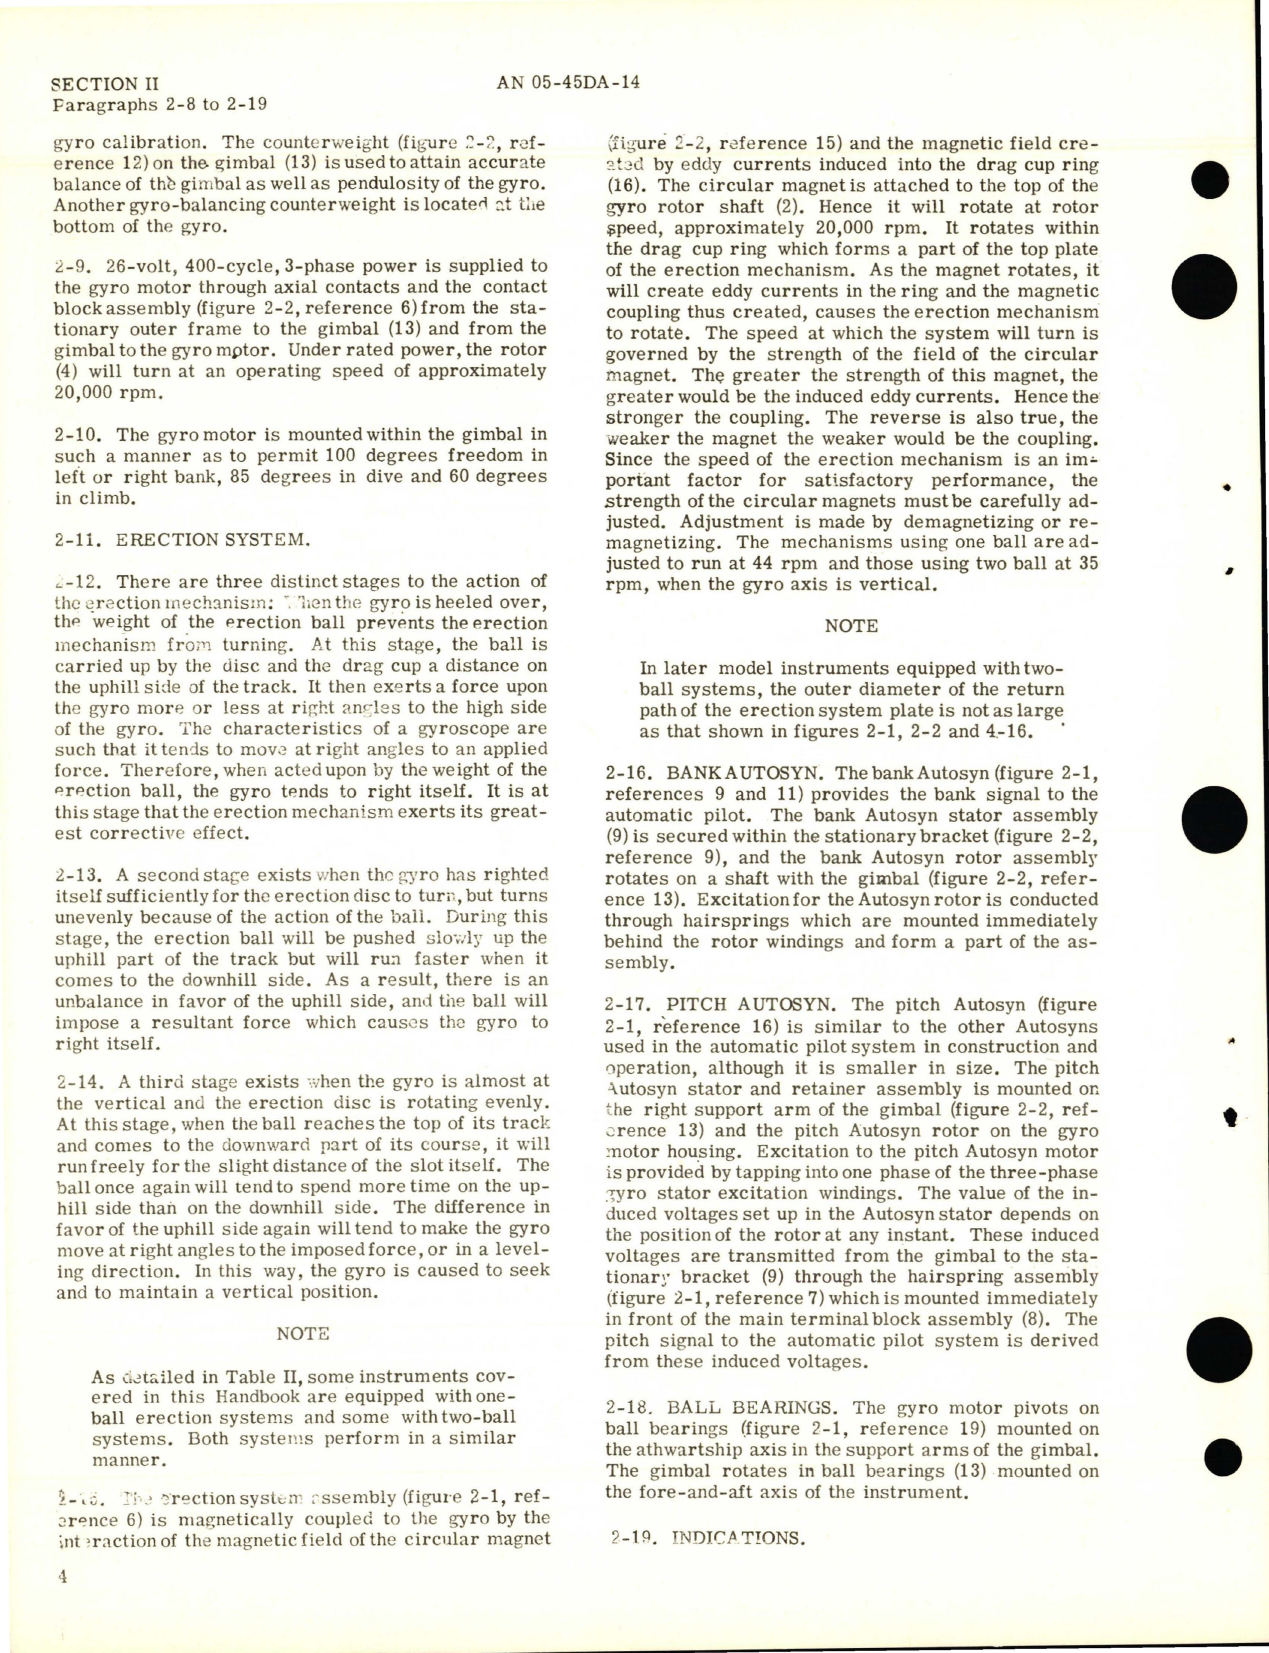 Sample page 8 from AirCorps Library document: Overhaul Instructions for Vertical Gyro Controls